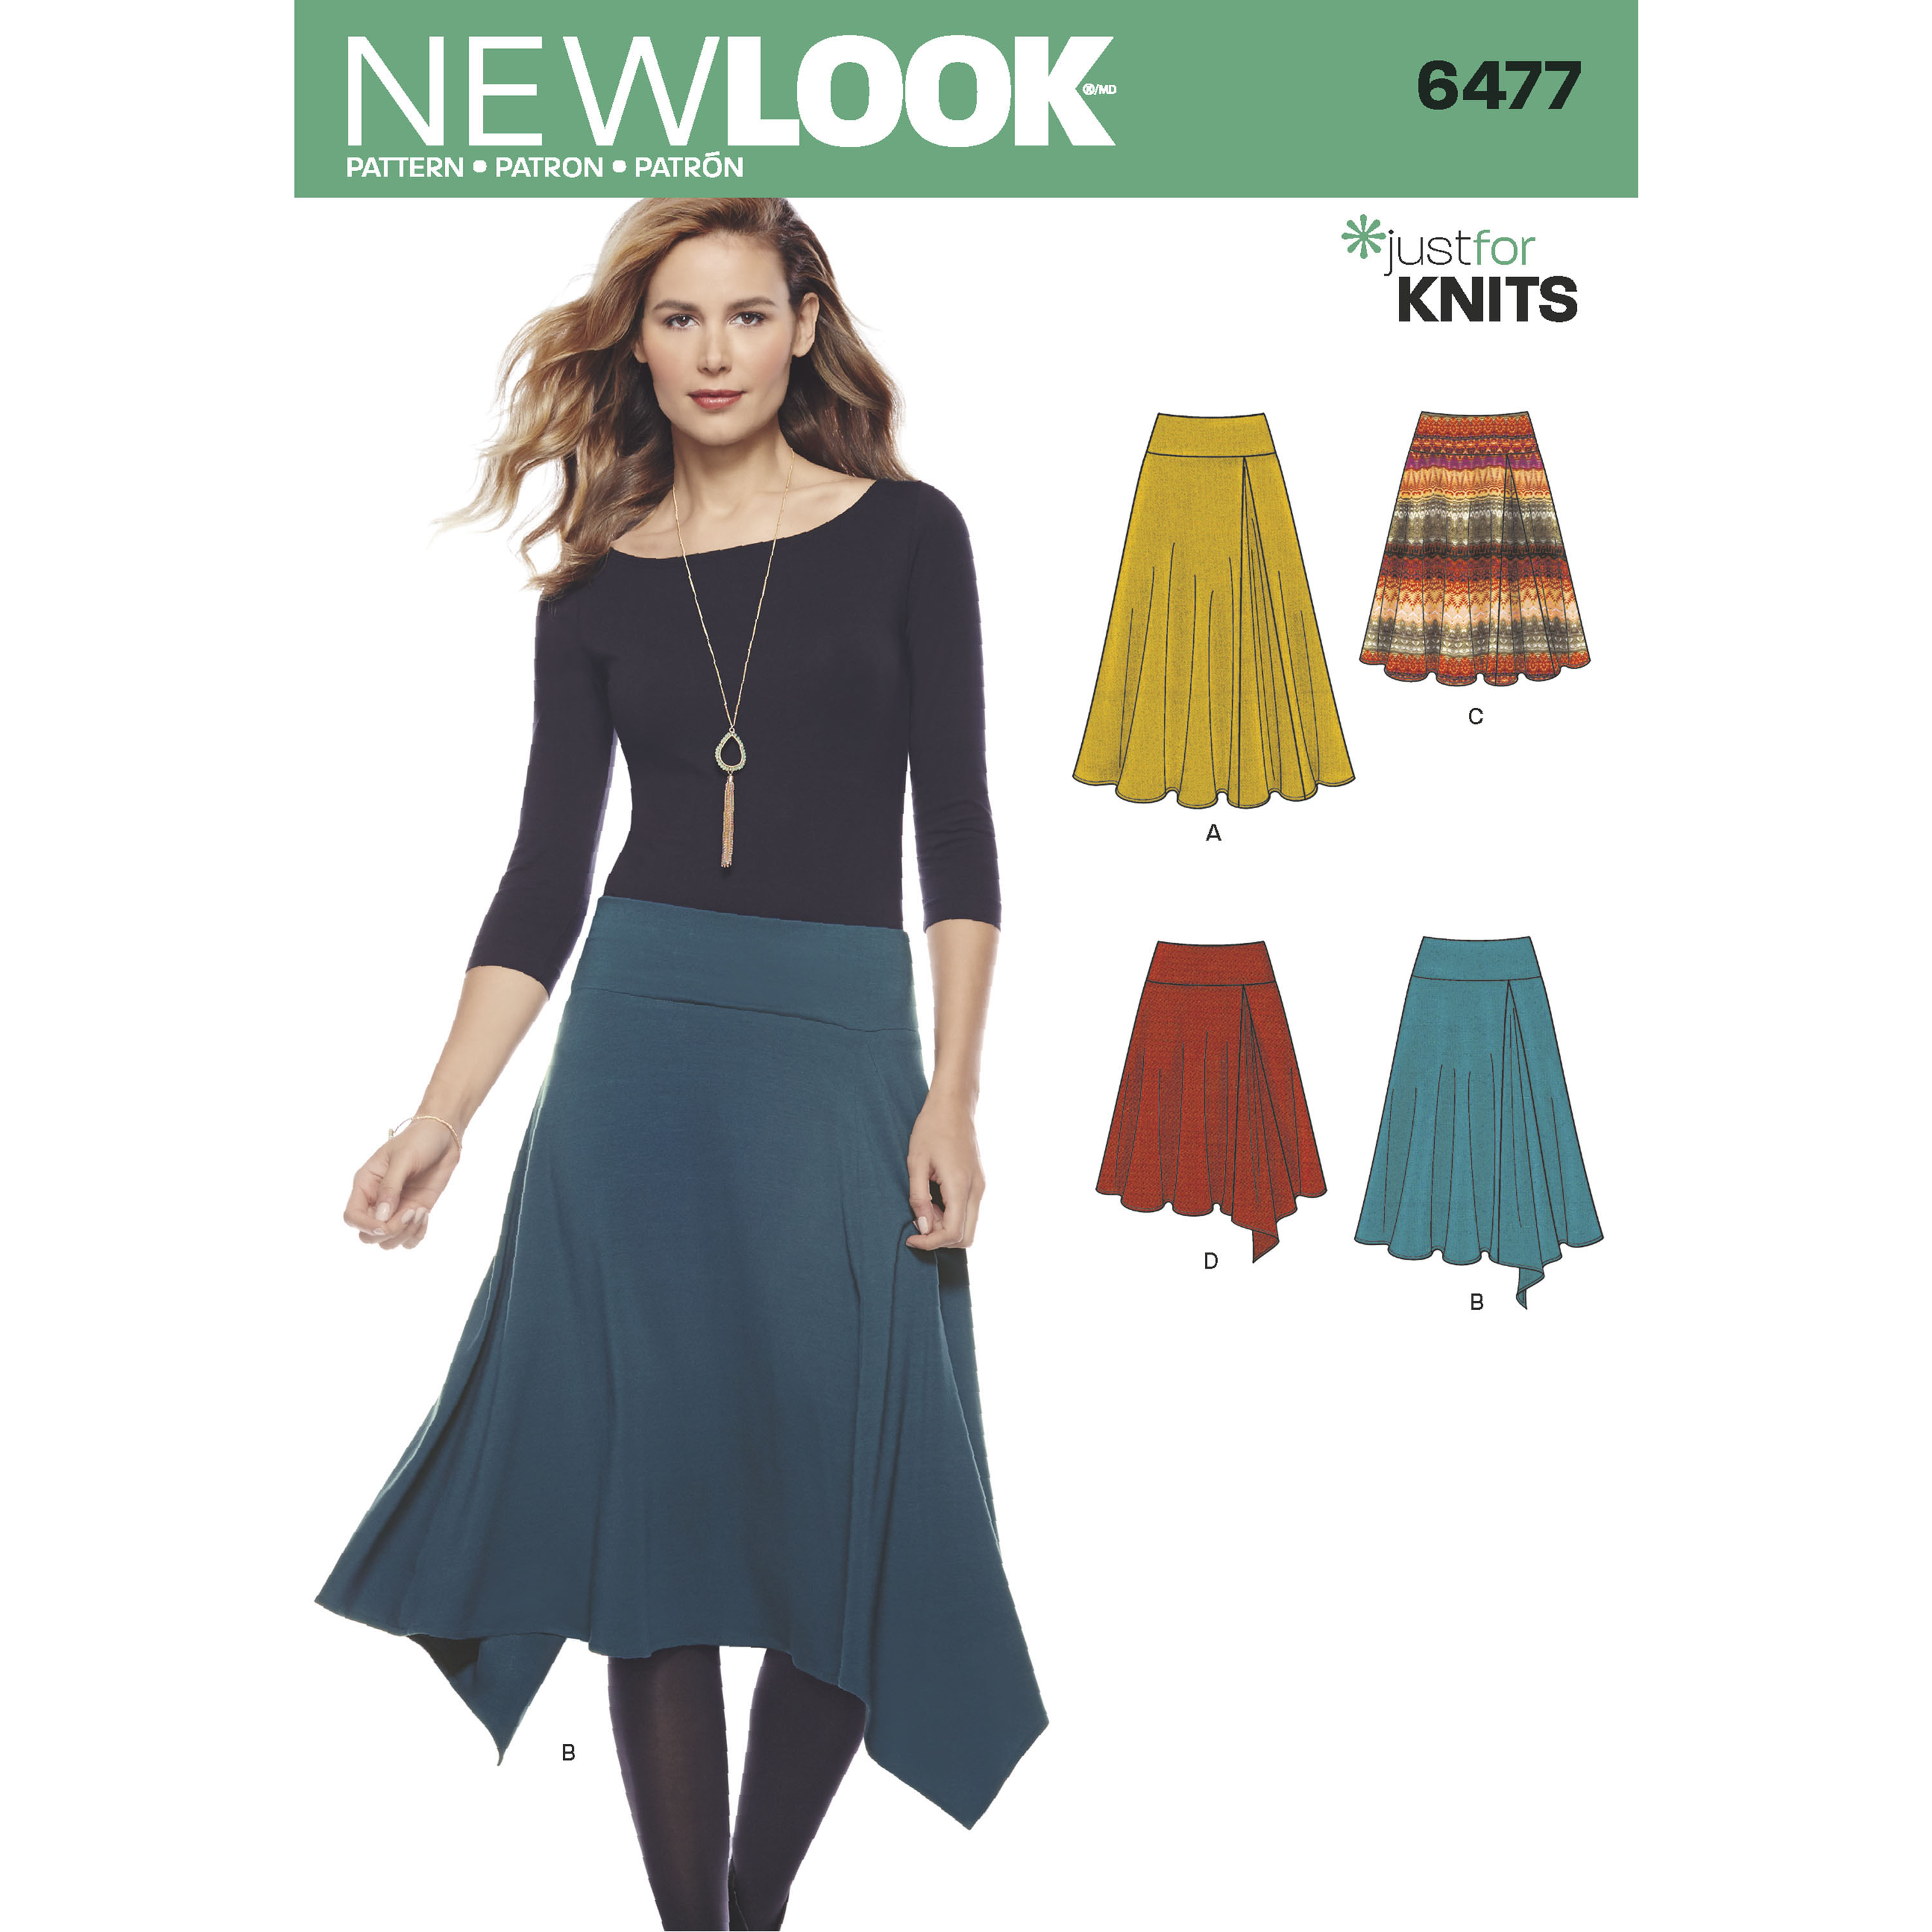 New Look 6477 Misses' Knit Skirts in Varying Lengths